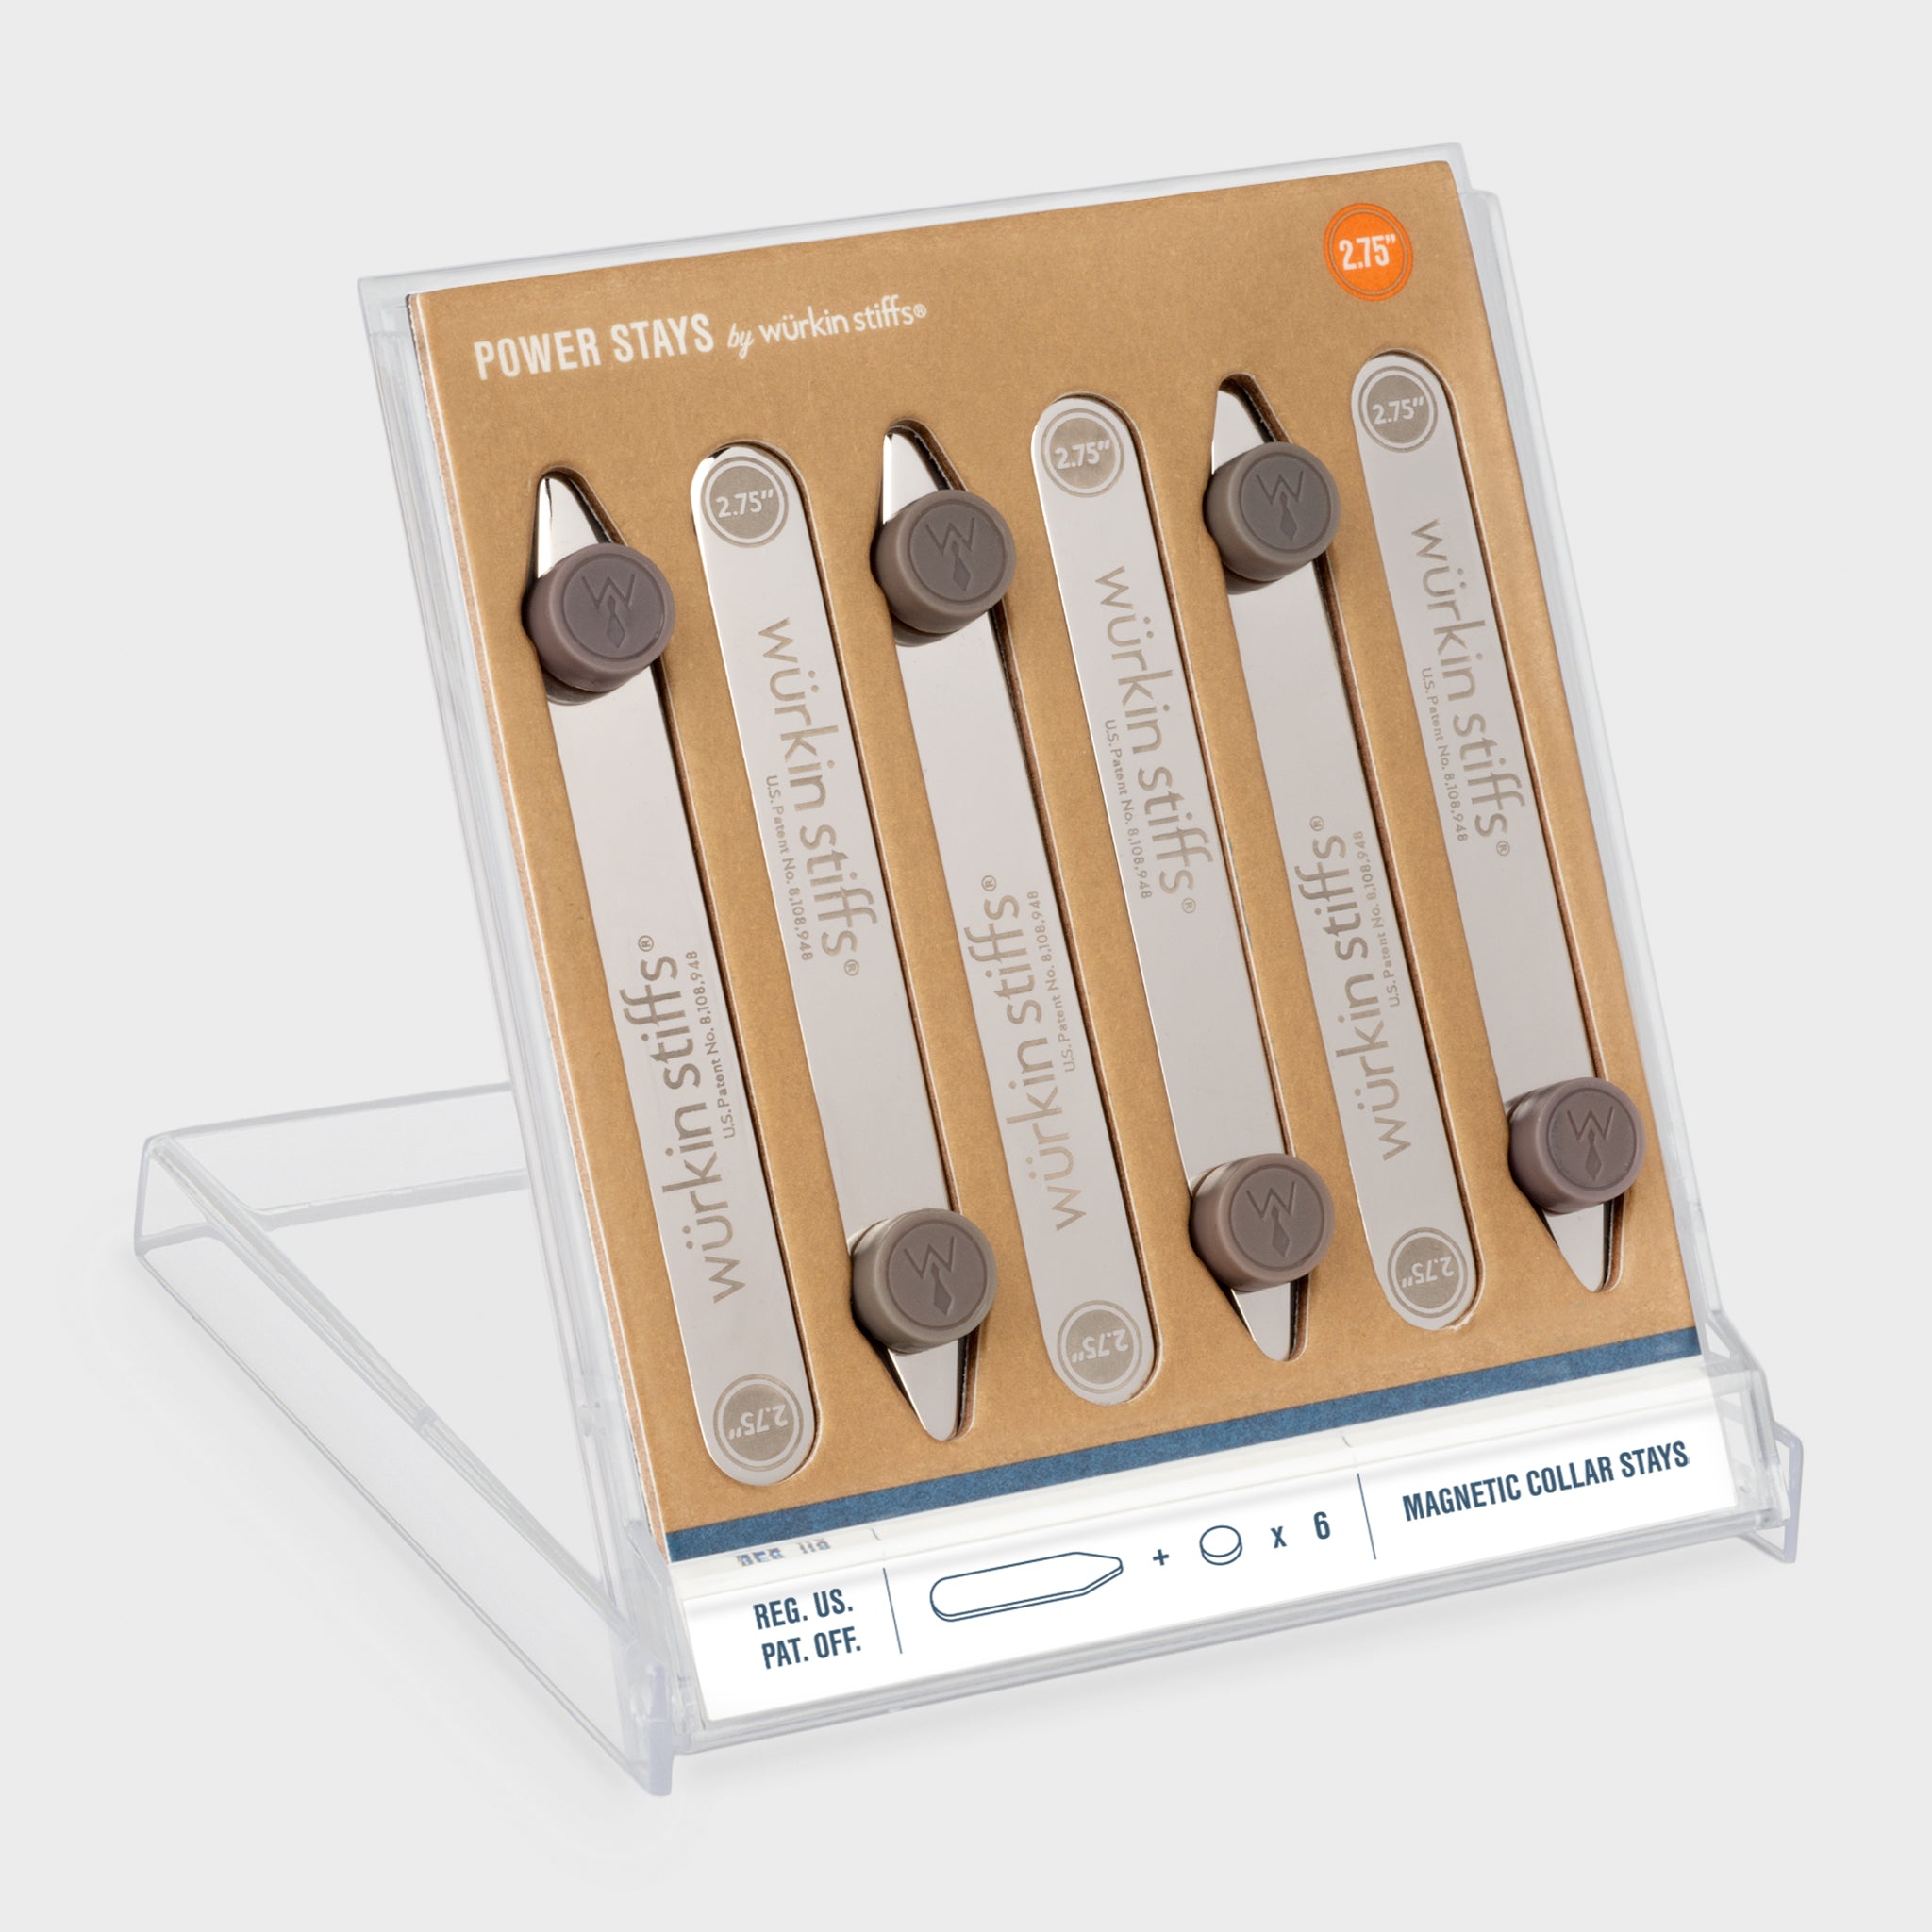 Stay Sharp with Magnetic Collar Stays